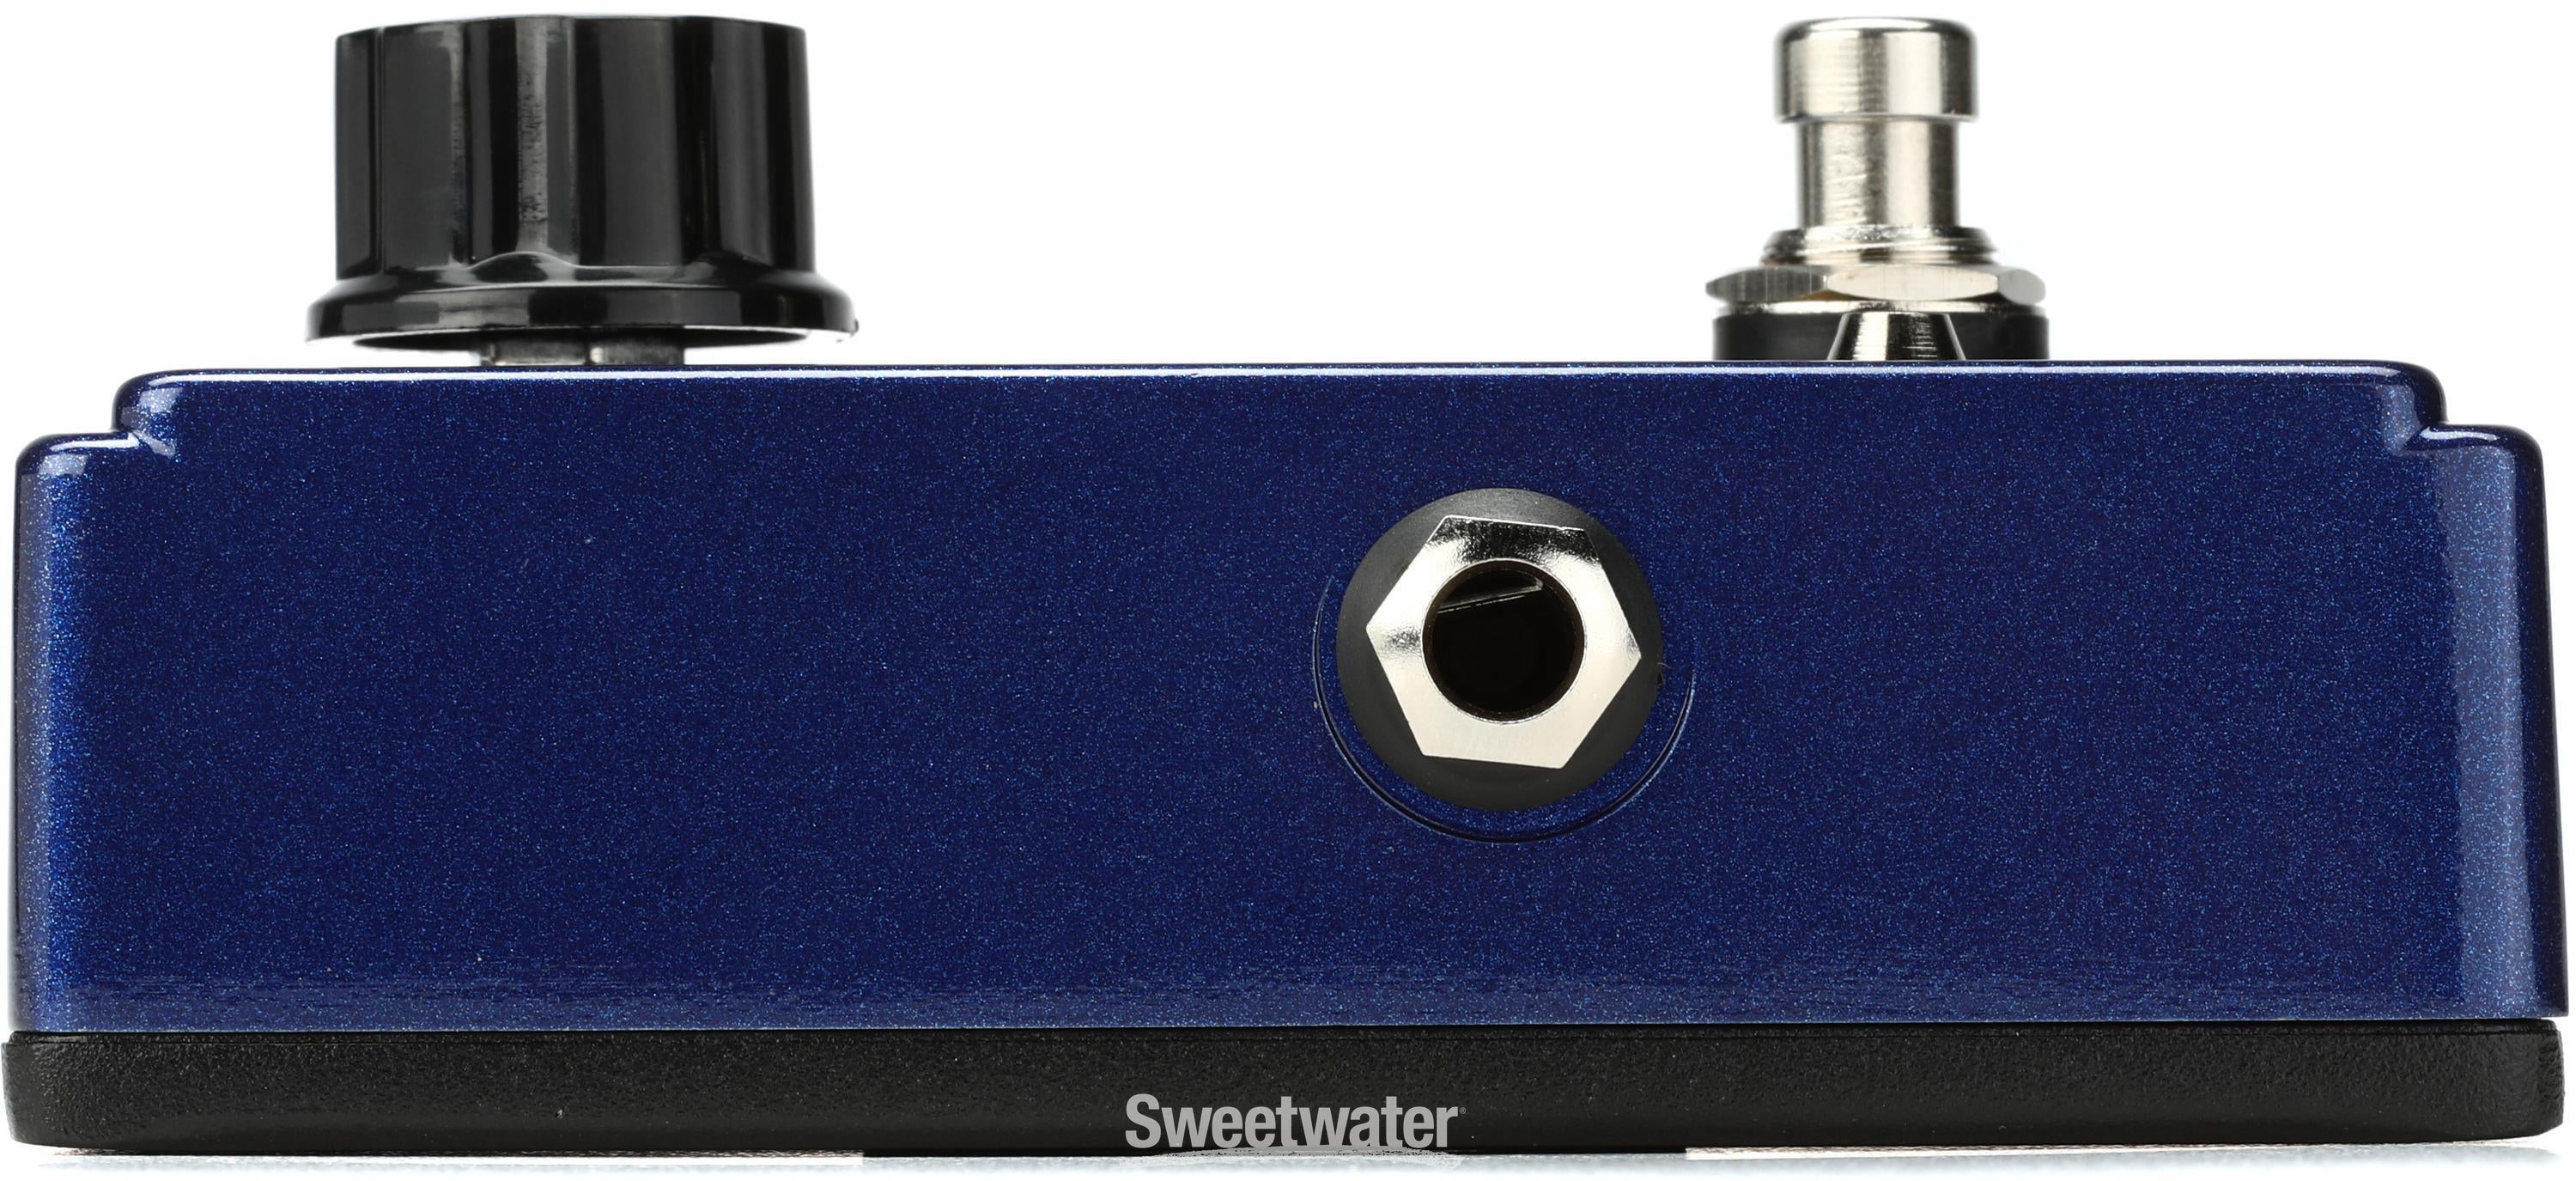 DOD Phasor 201 Effect Pedal Reviews | Sweetwater